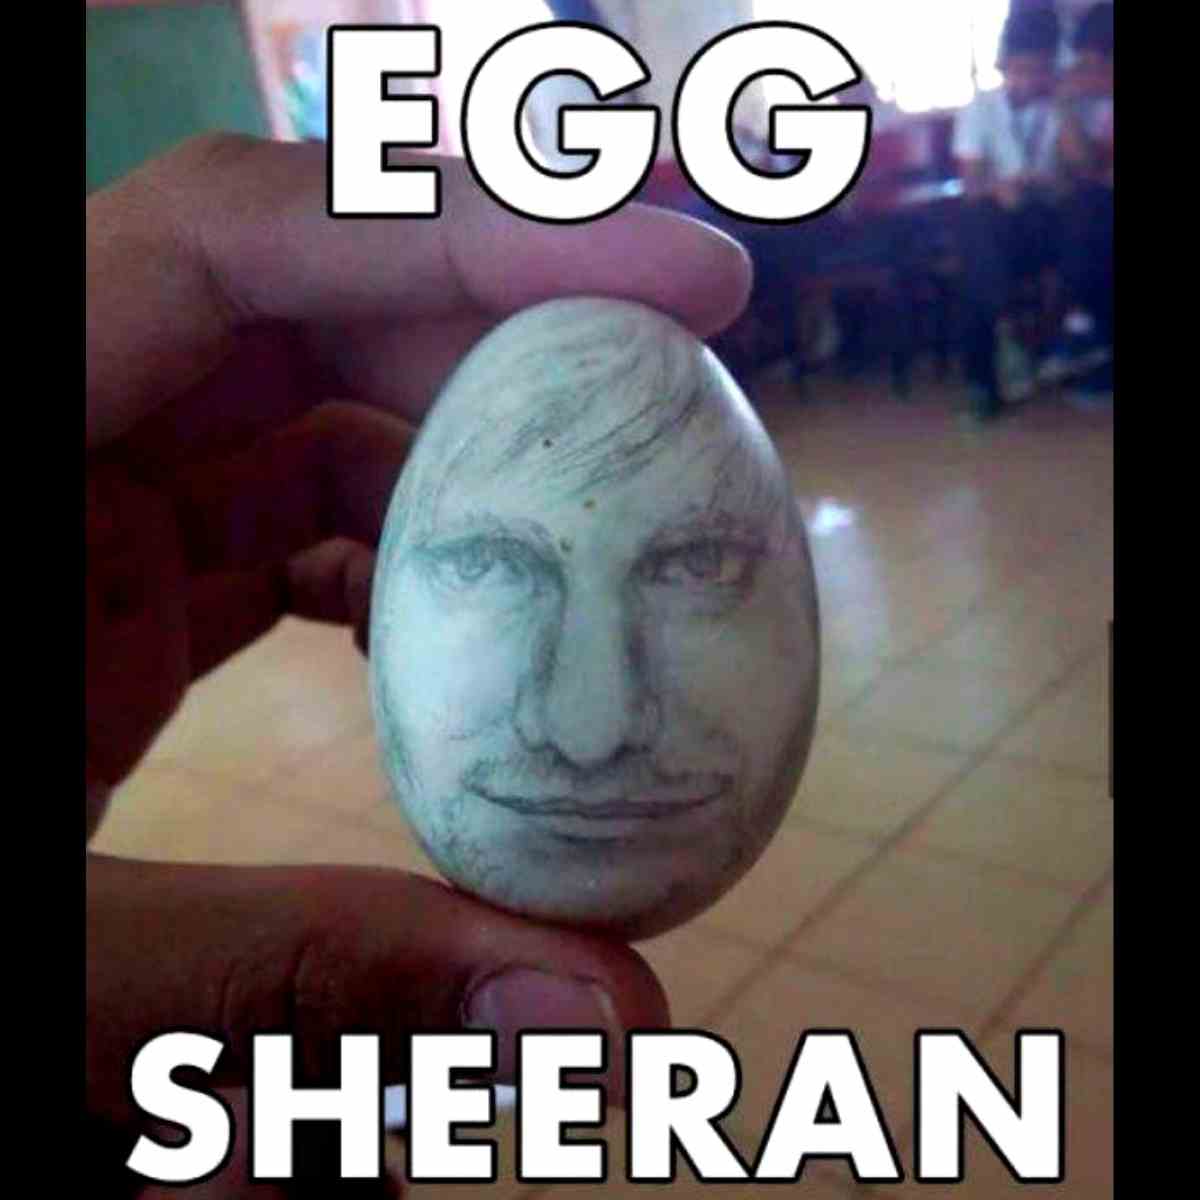 Egg Memes - 25+ Funny Images That Will Crack You Up!